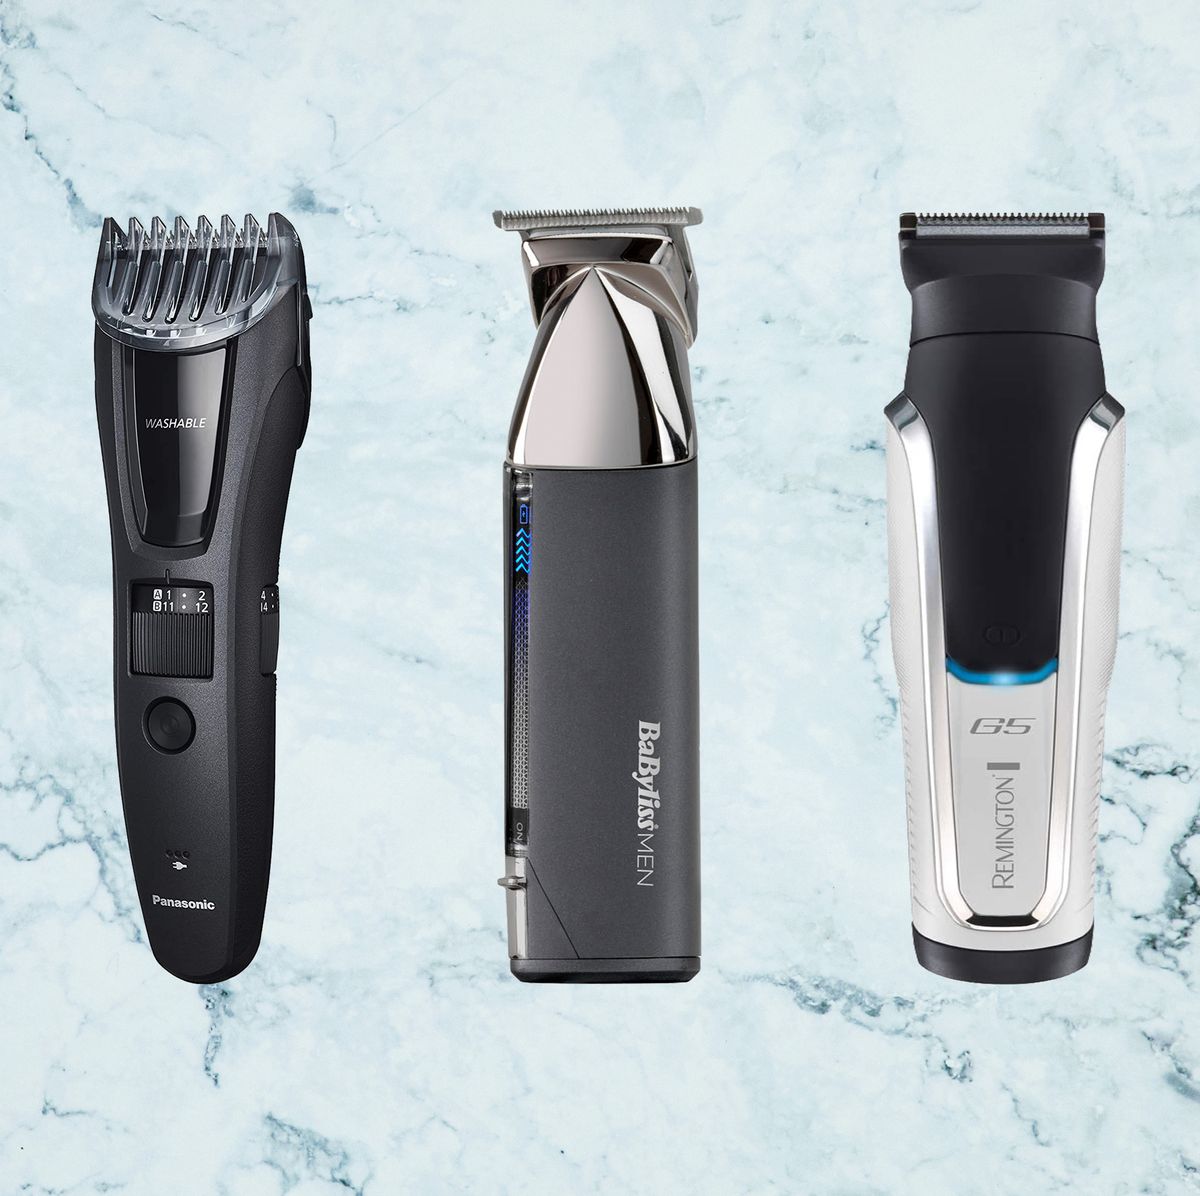 Best body groomers 2021 - 8 top trimmers to buy now